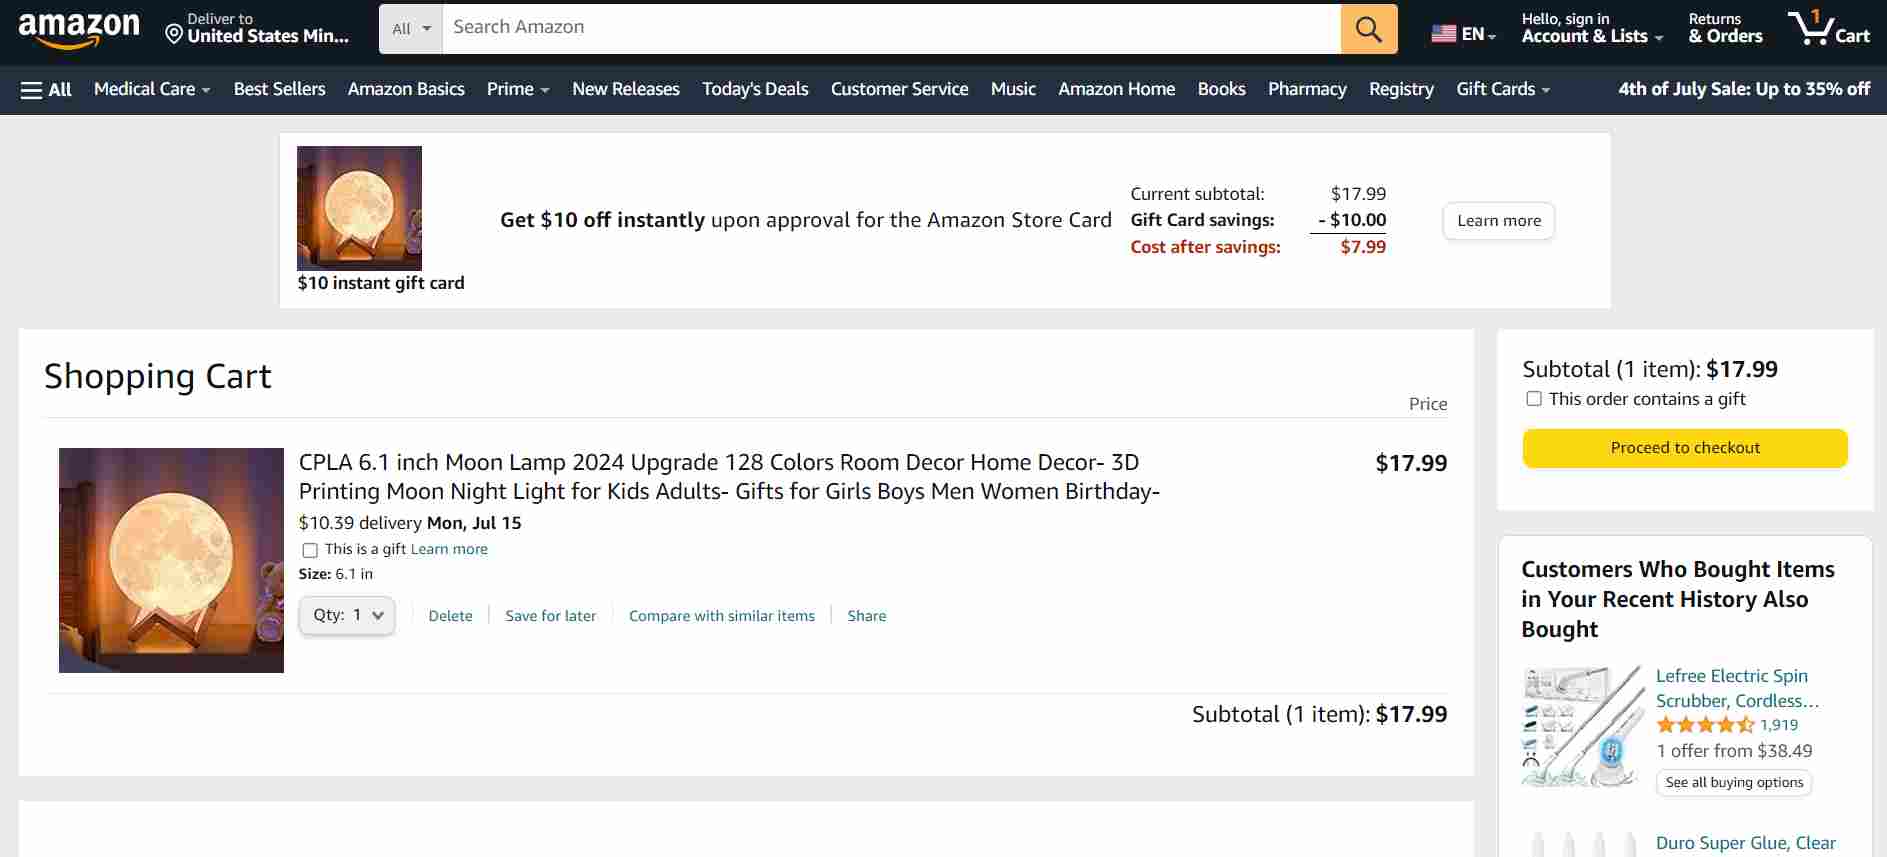 amazon-shopping-cart-showing-product-purchase-and-savings